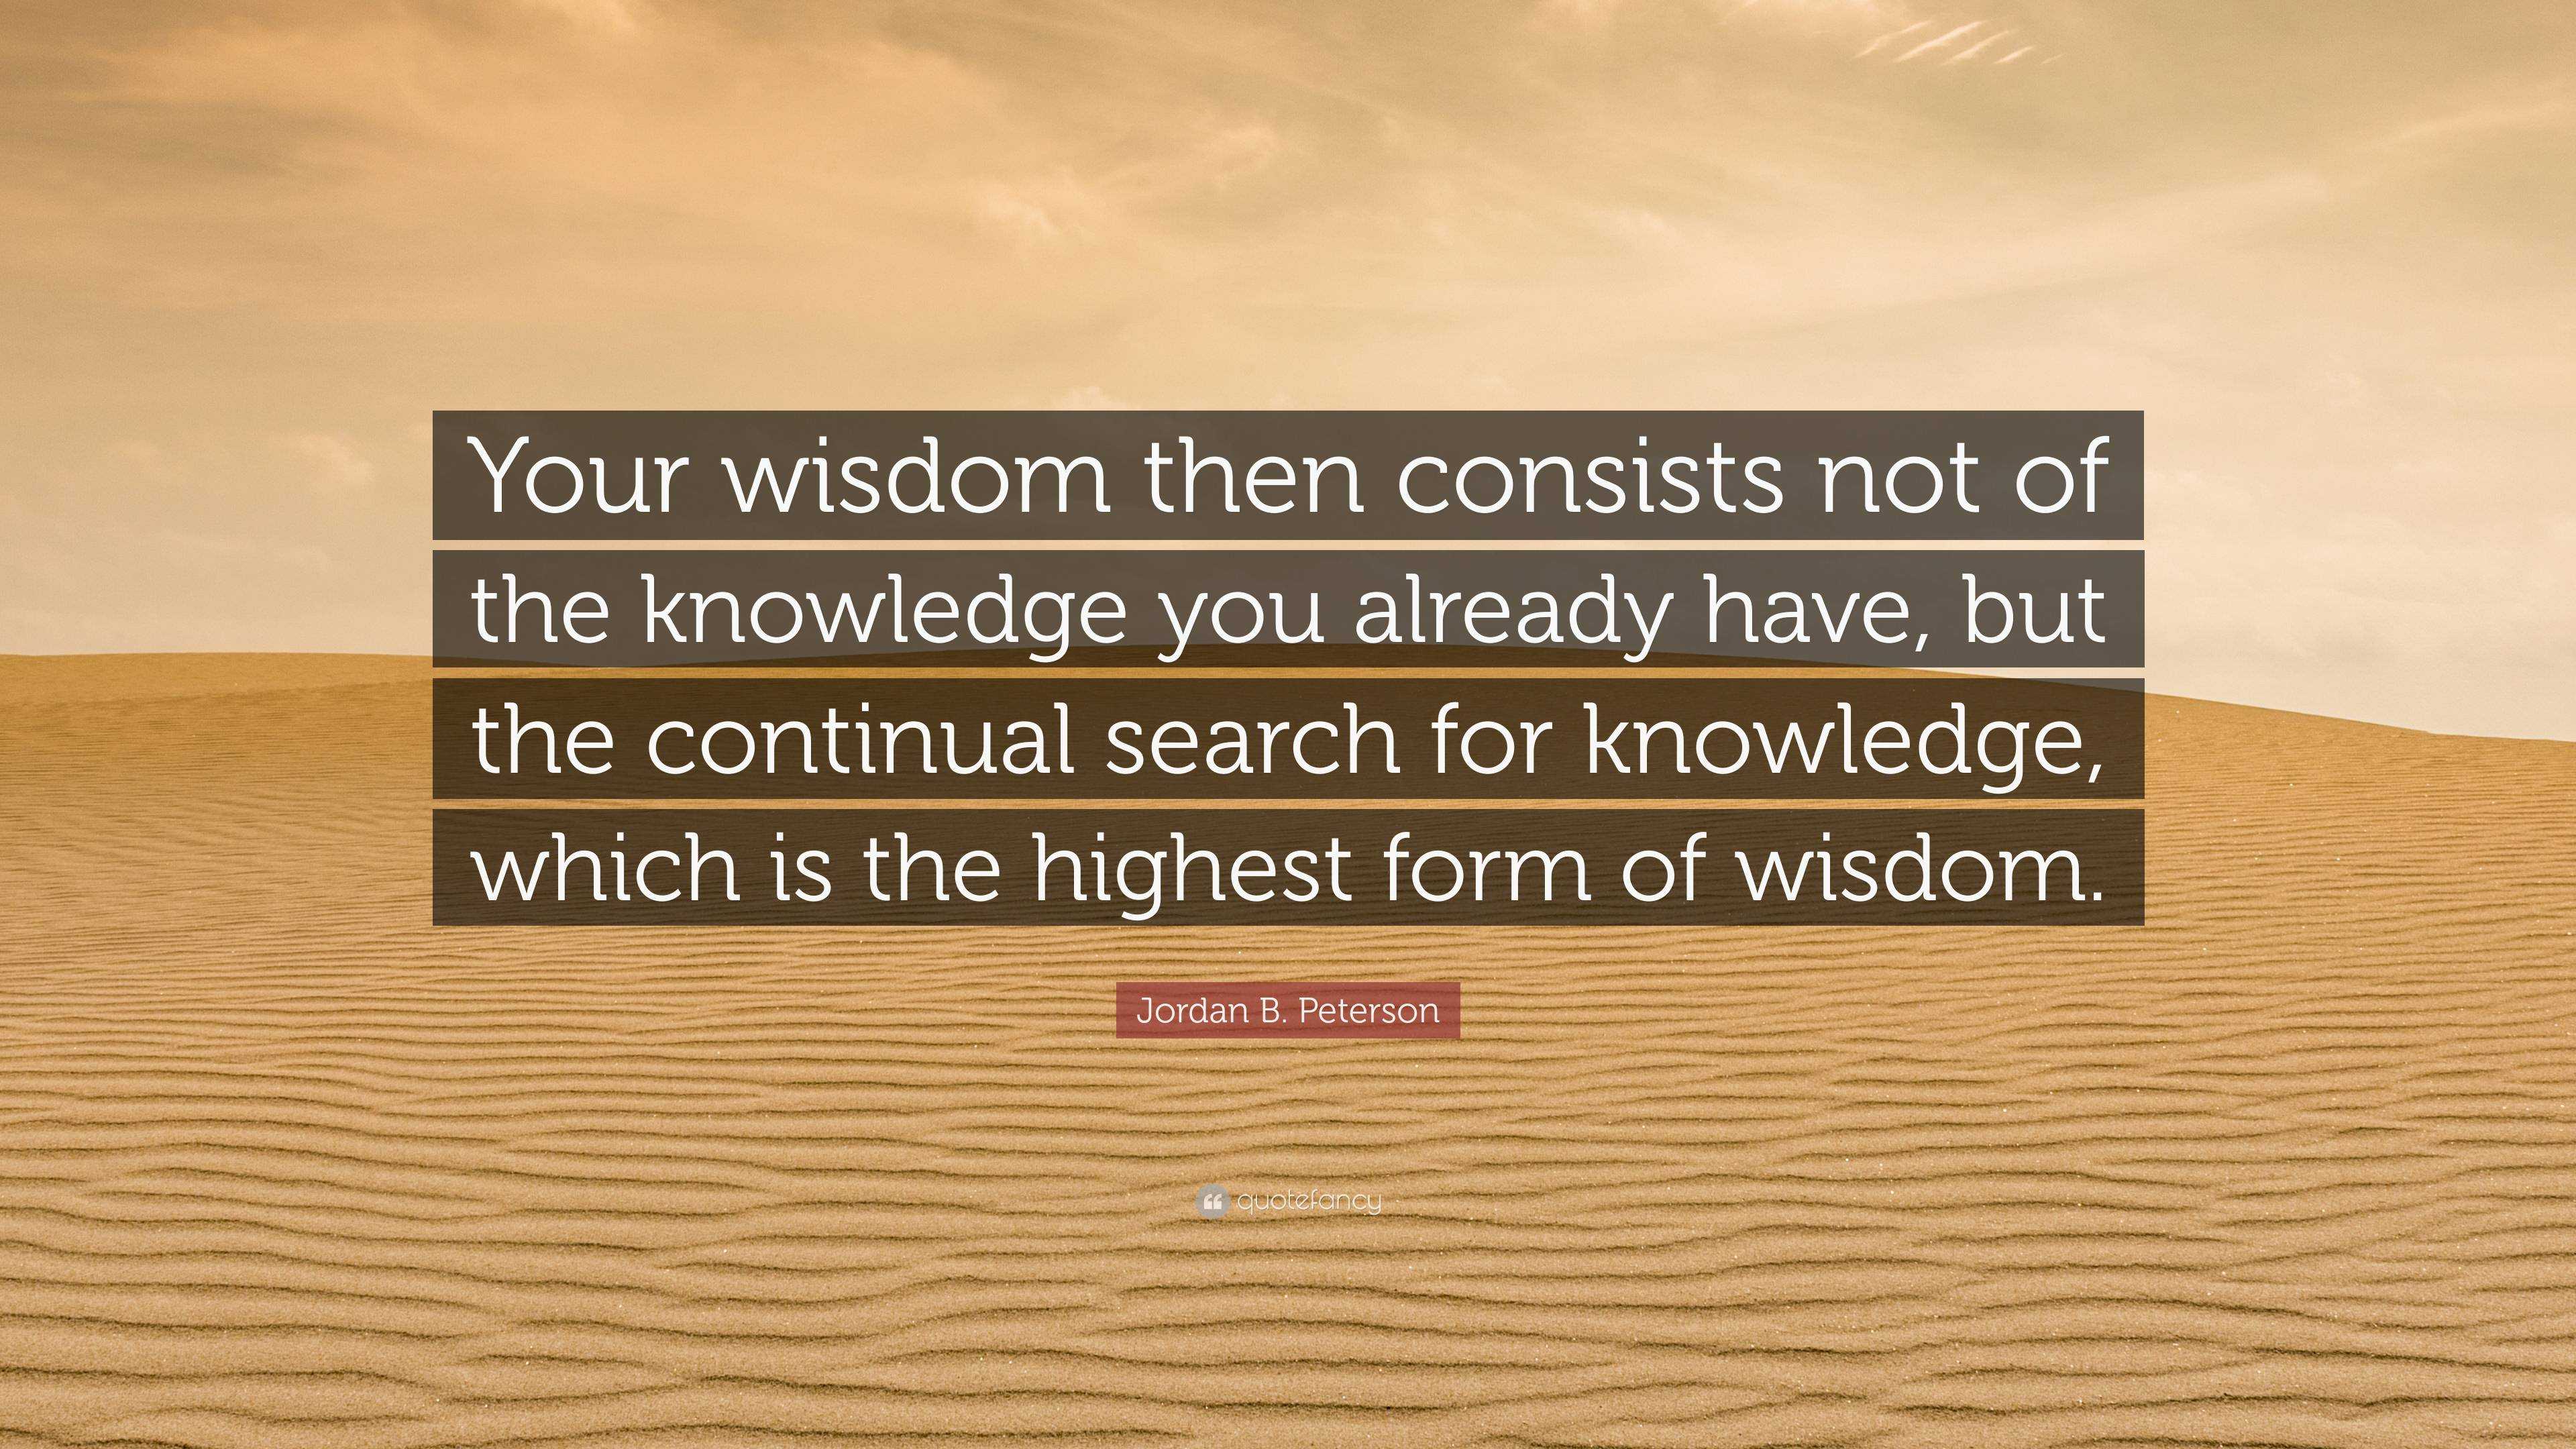 Jordan B. Peterson Quote: “Your wisdom then consists not of the ...